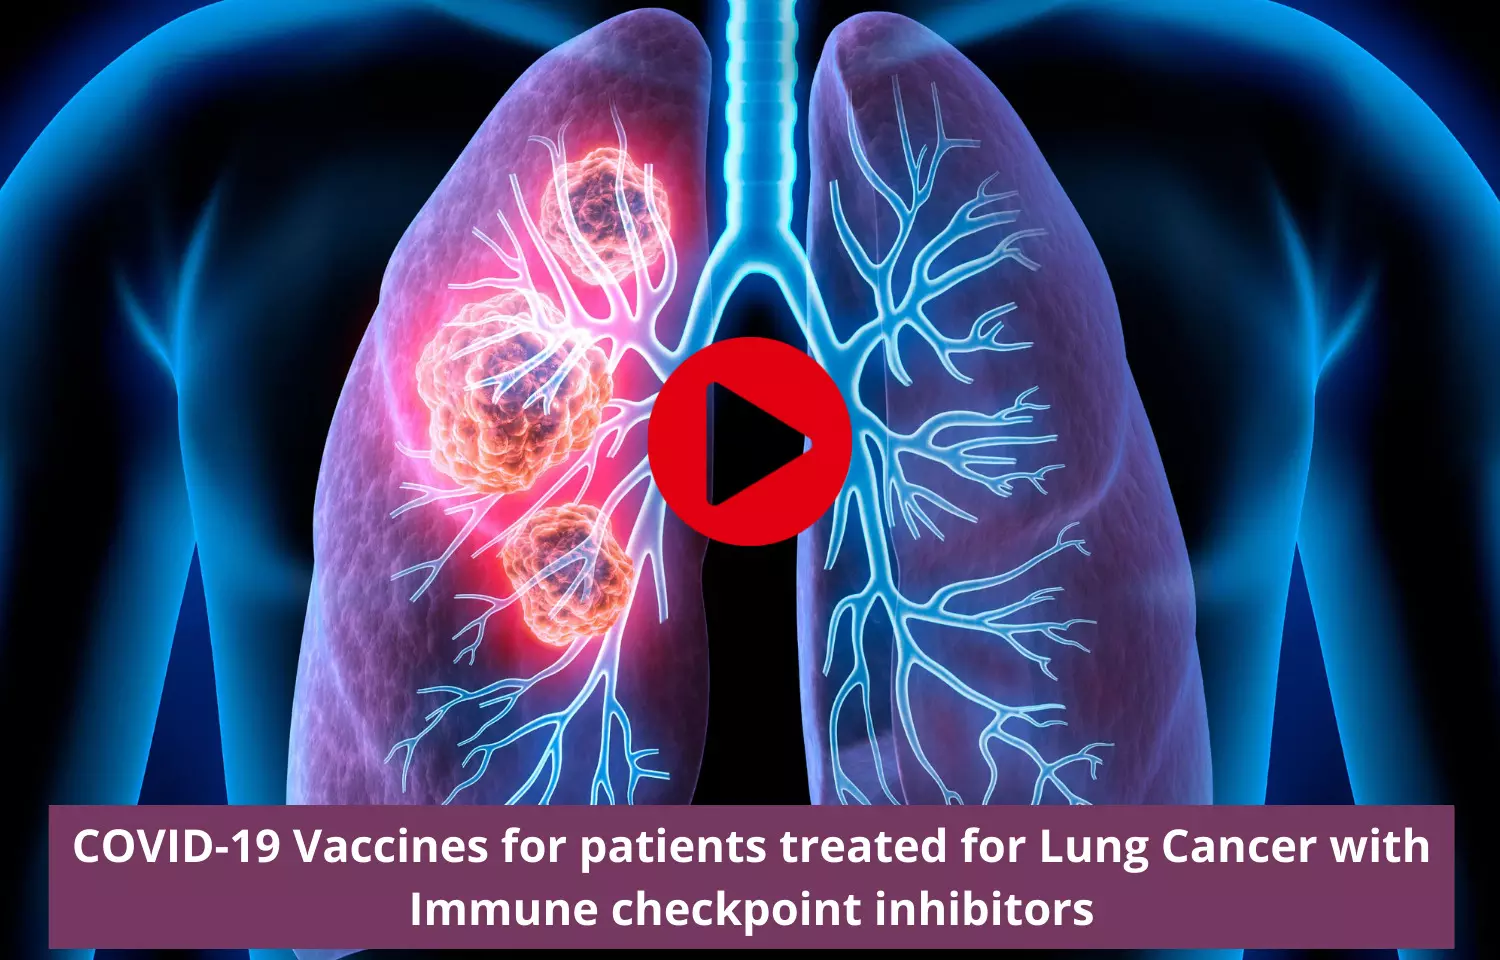 COVID-19 Vaccines for patients treated for Lung Cancer with Immune checkpoint inhibitors